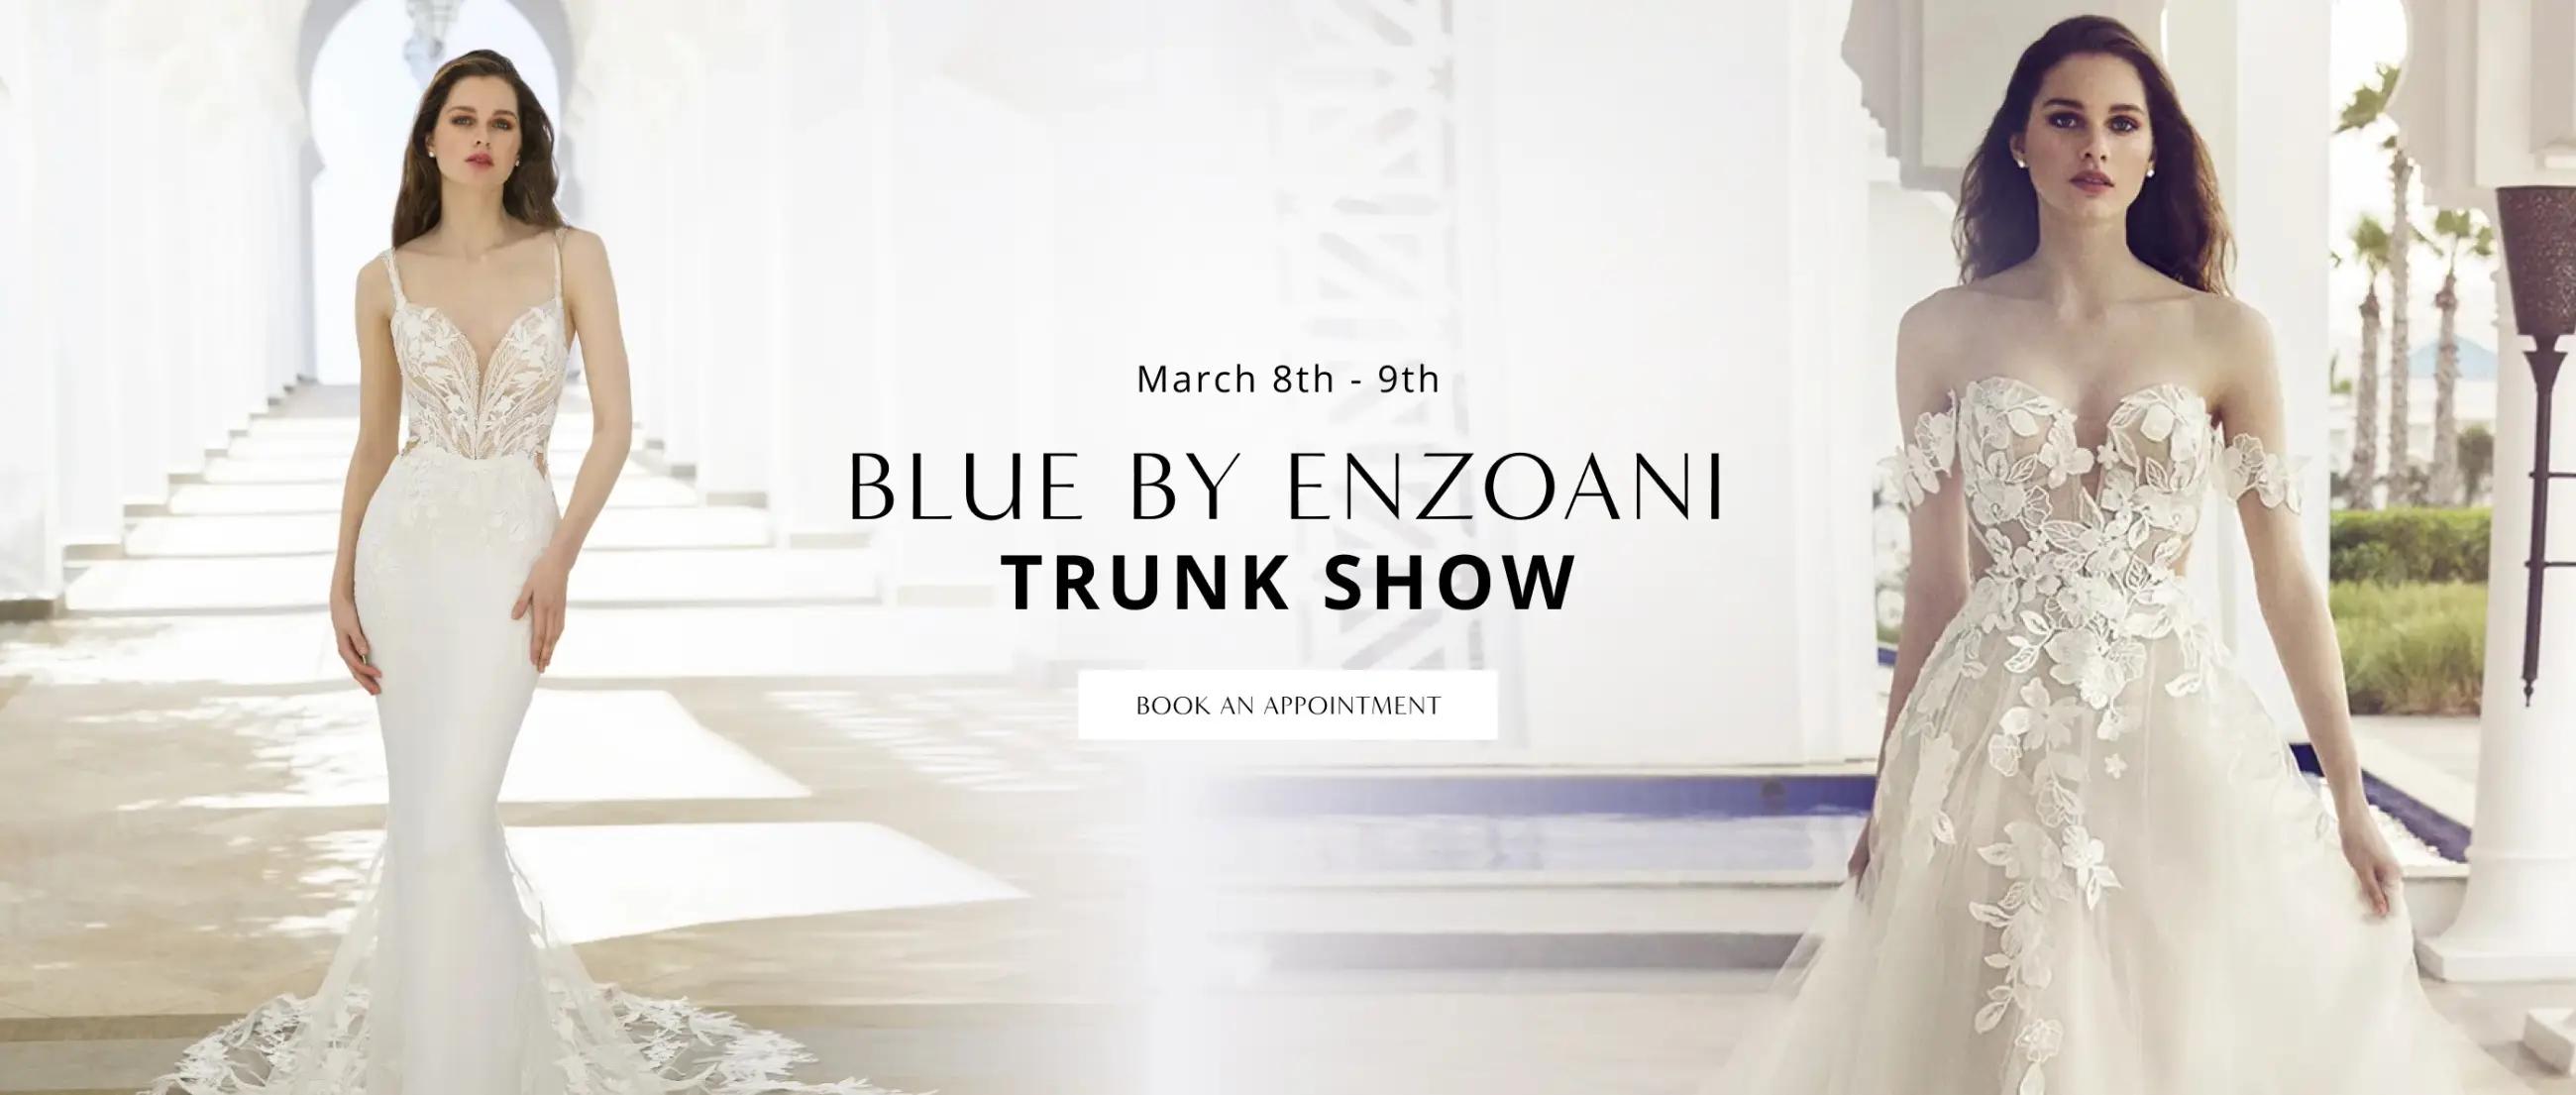 Blue By Enzoani Trunk Show banner